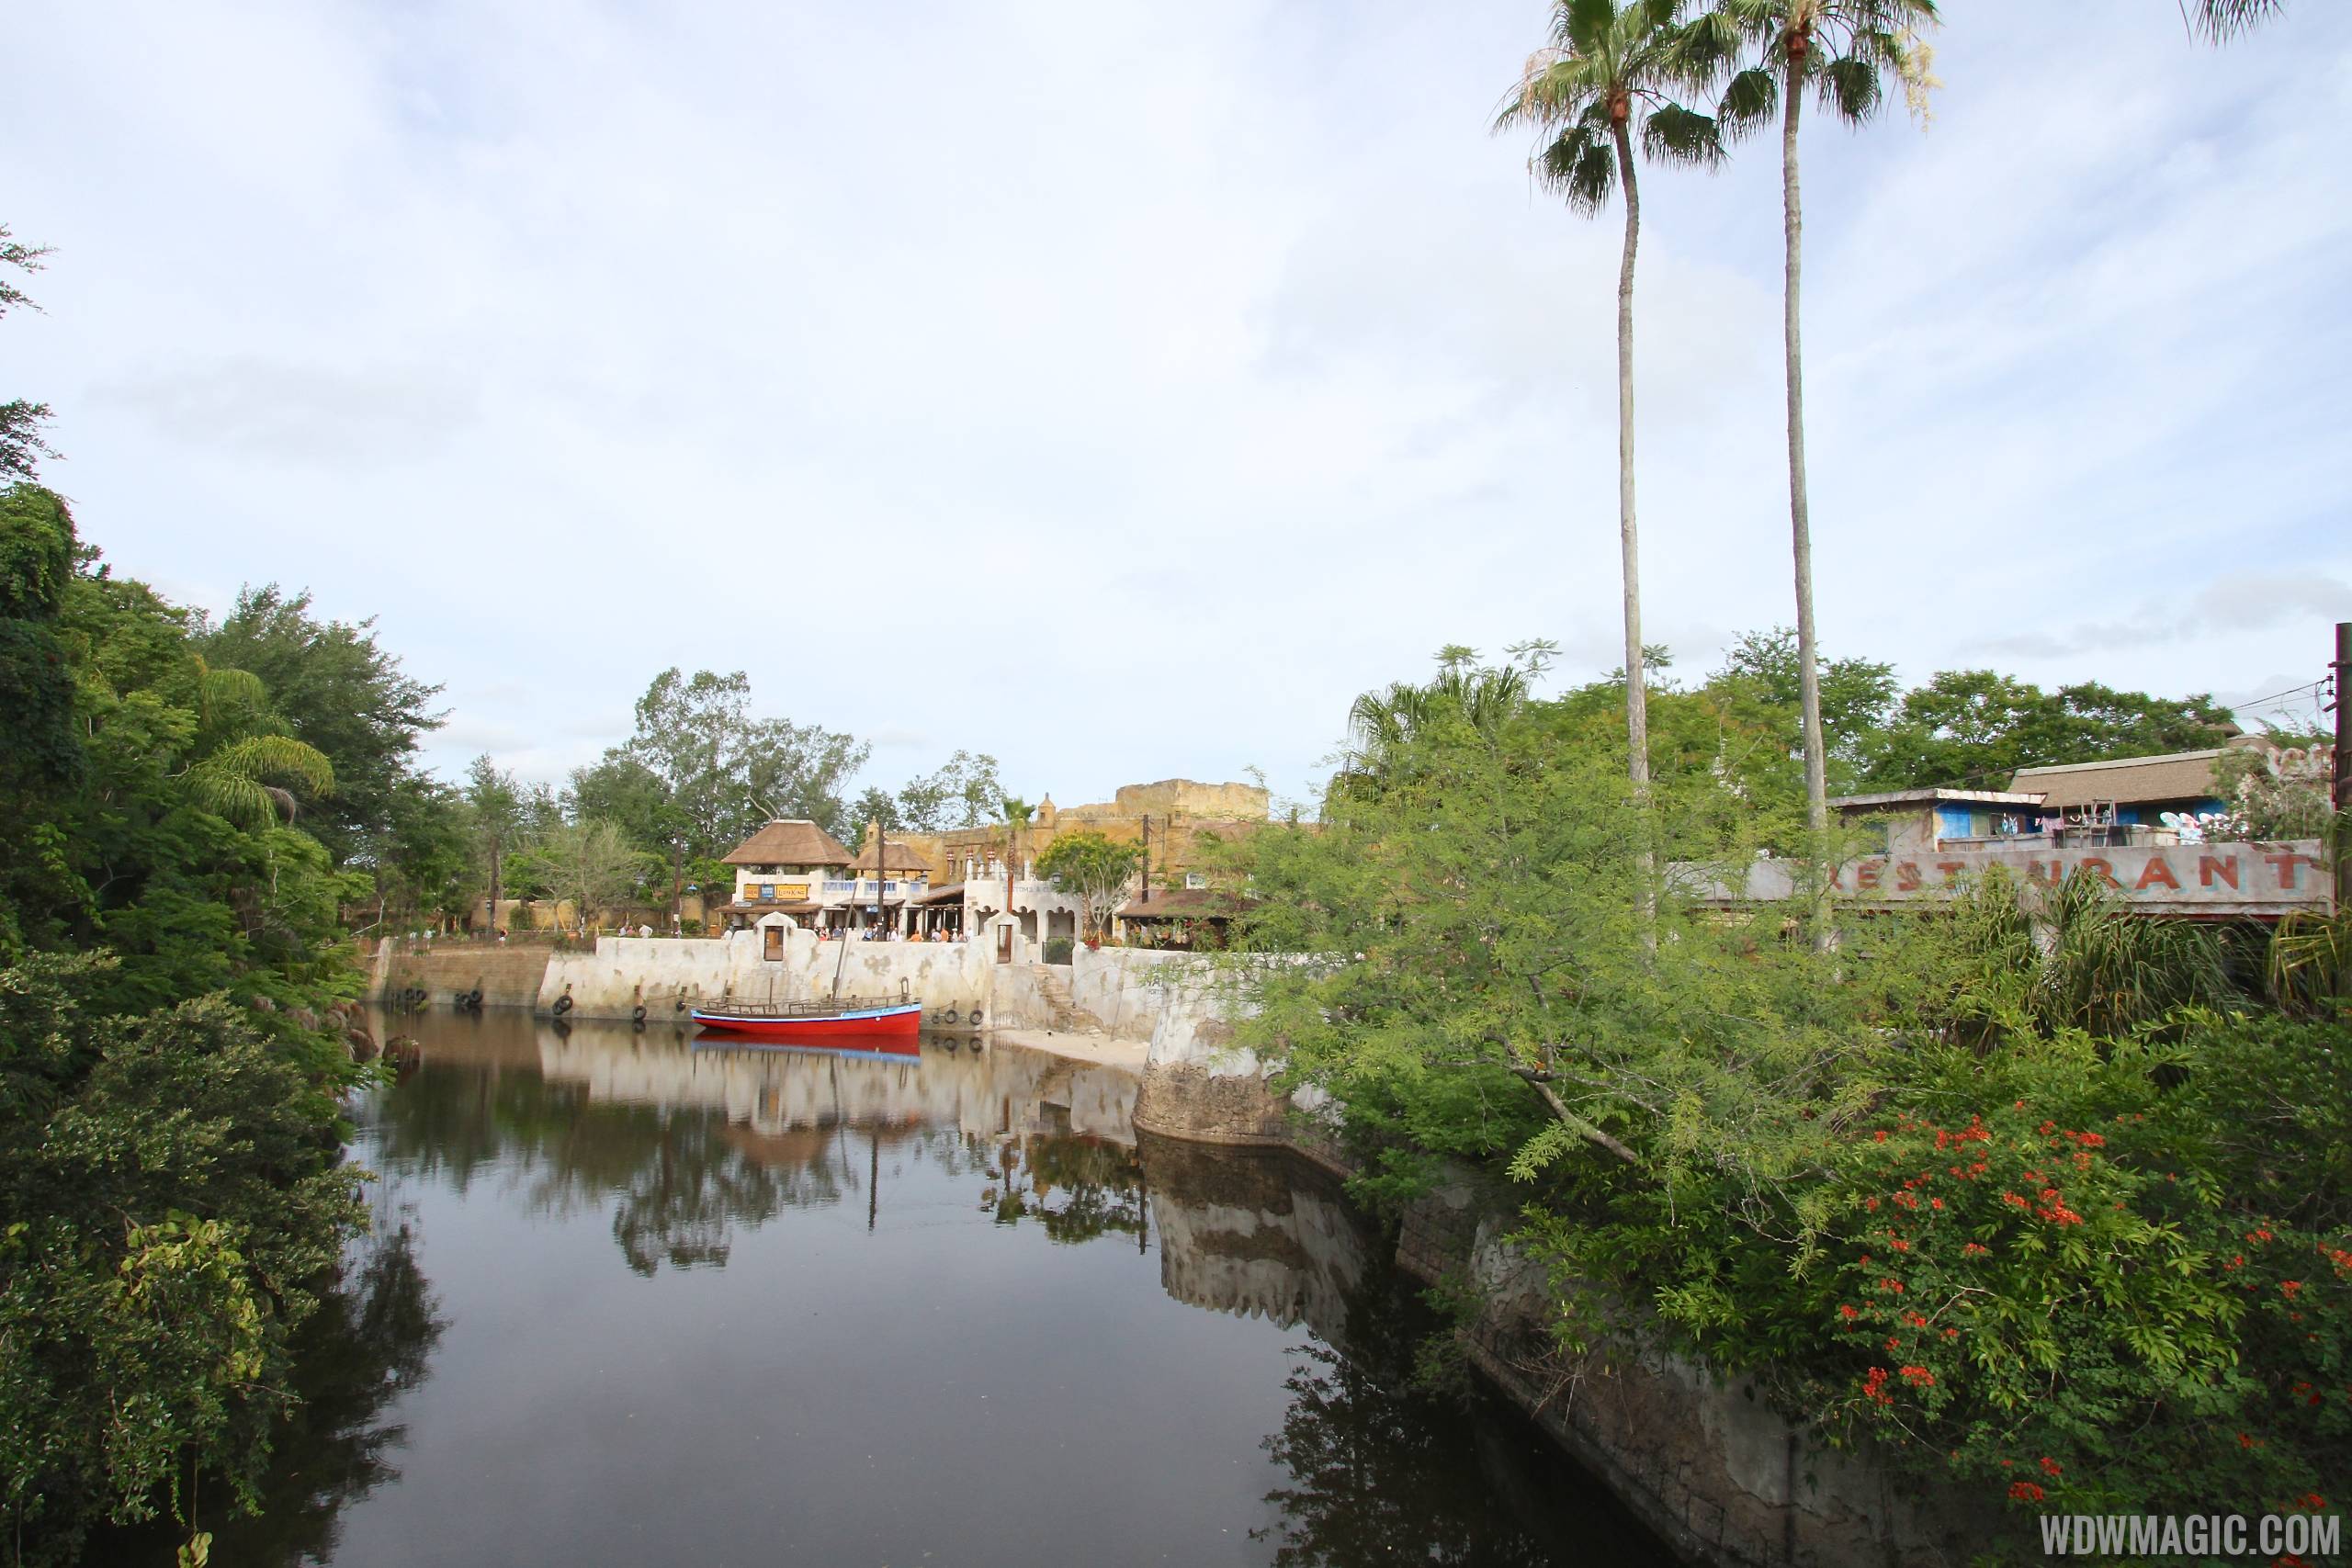 New Harambe Theatre area in Africa - View from the Discovery Island bridge